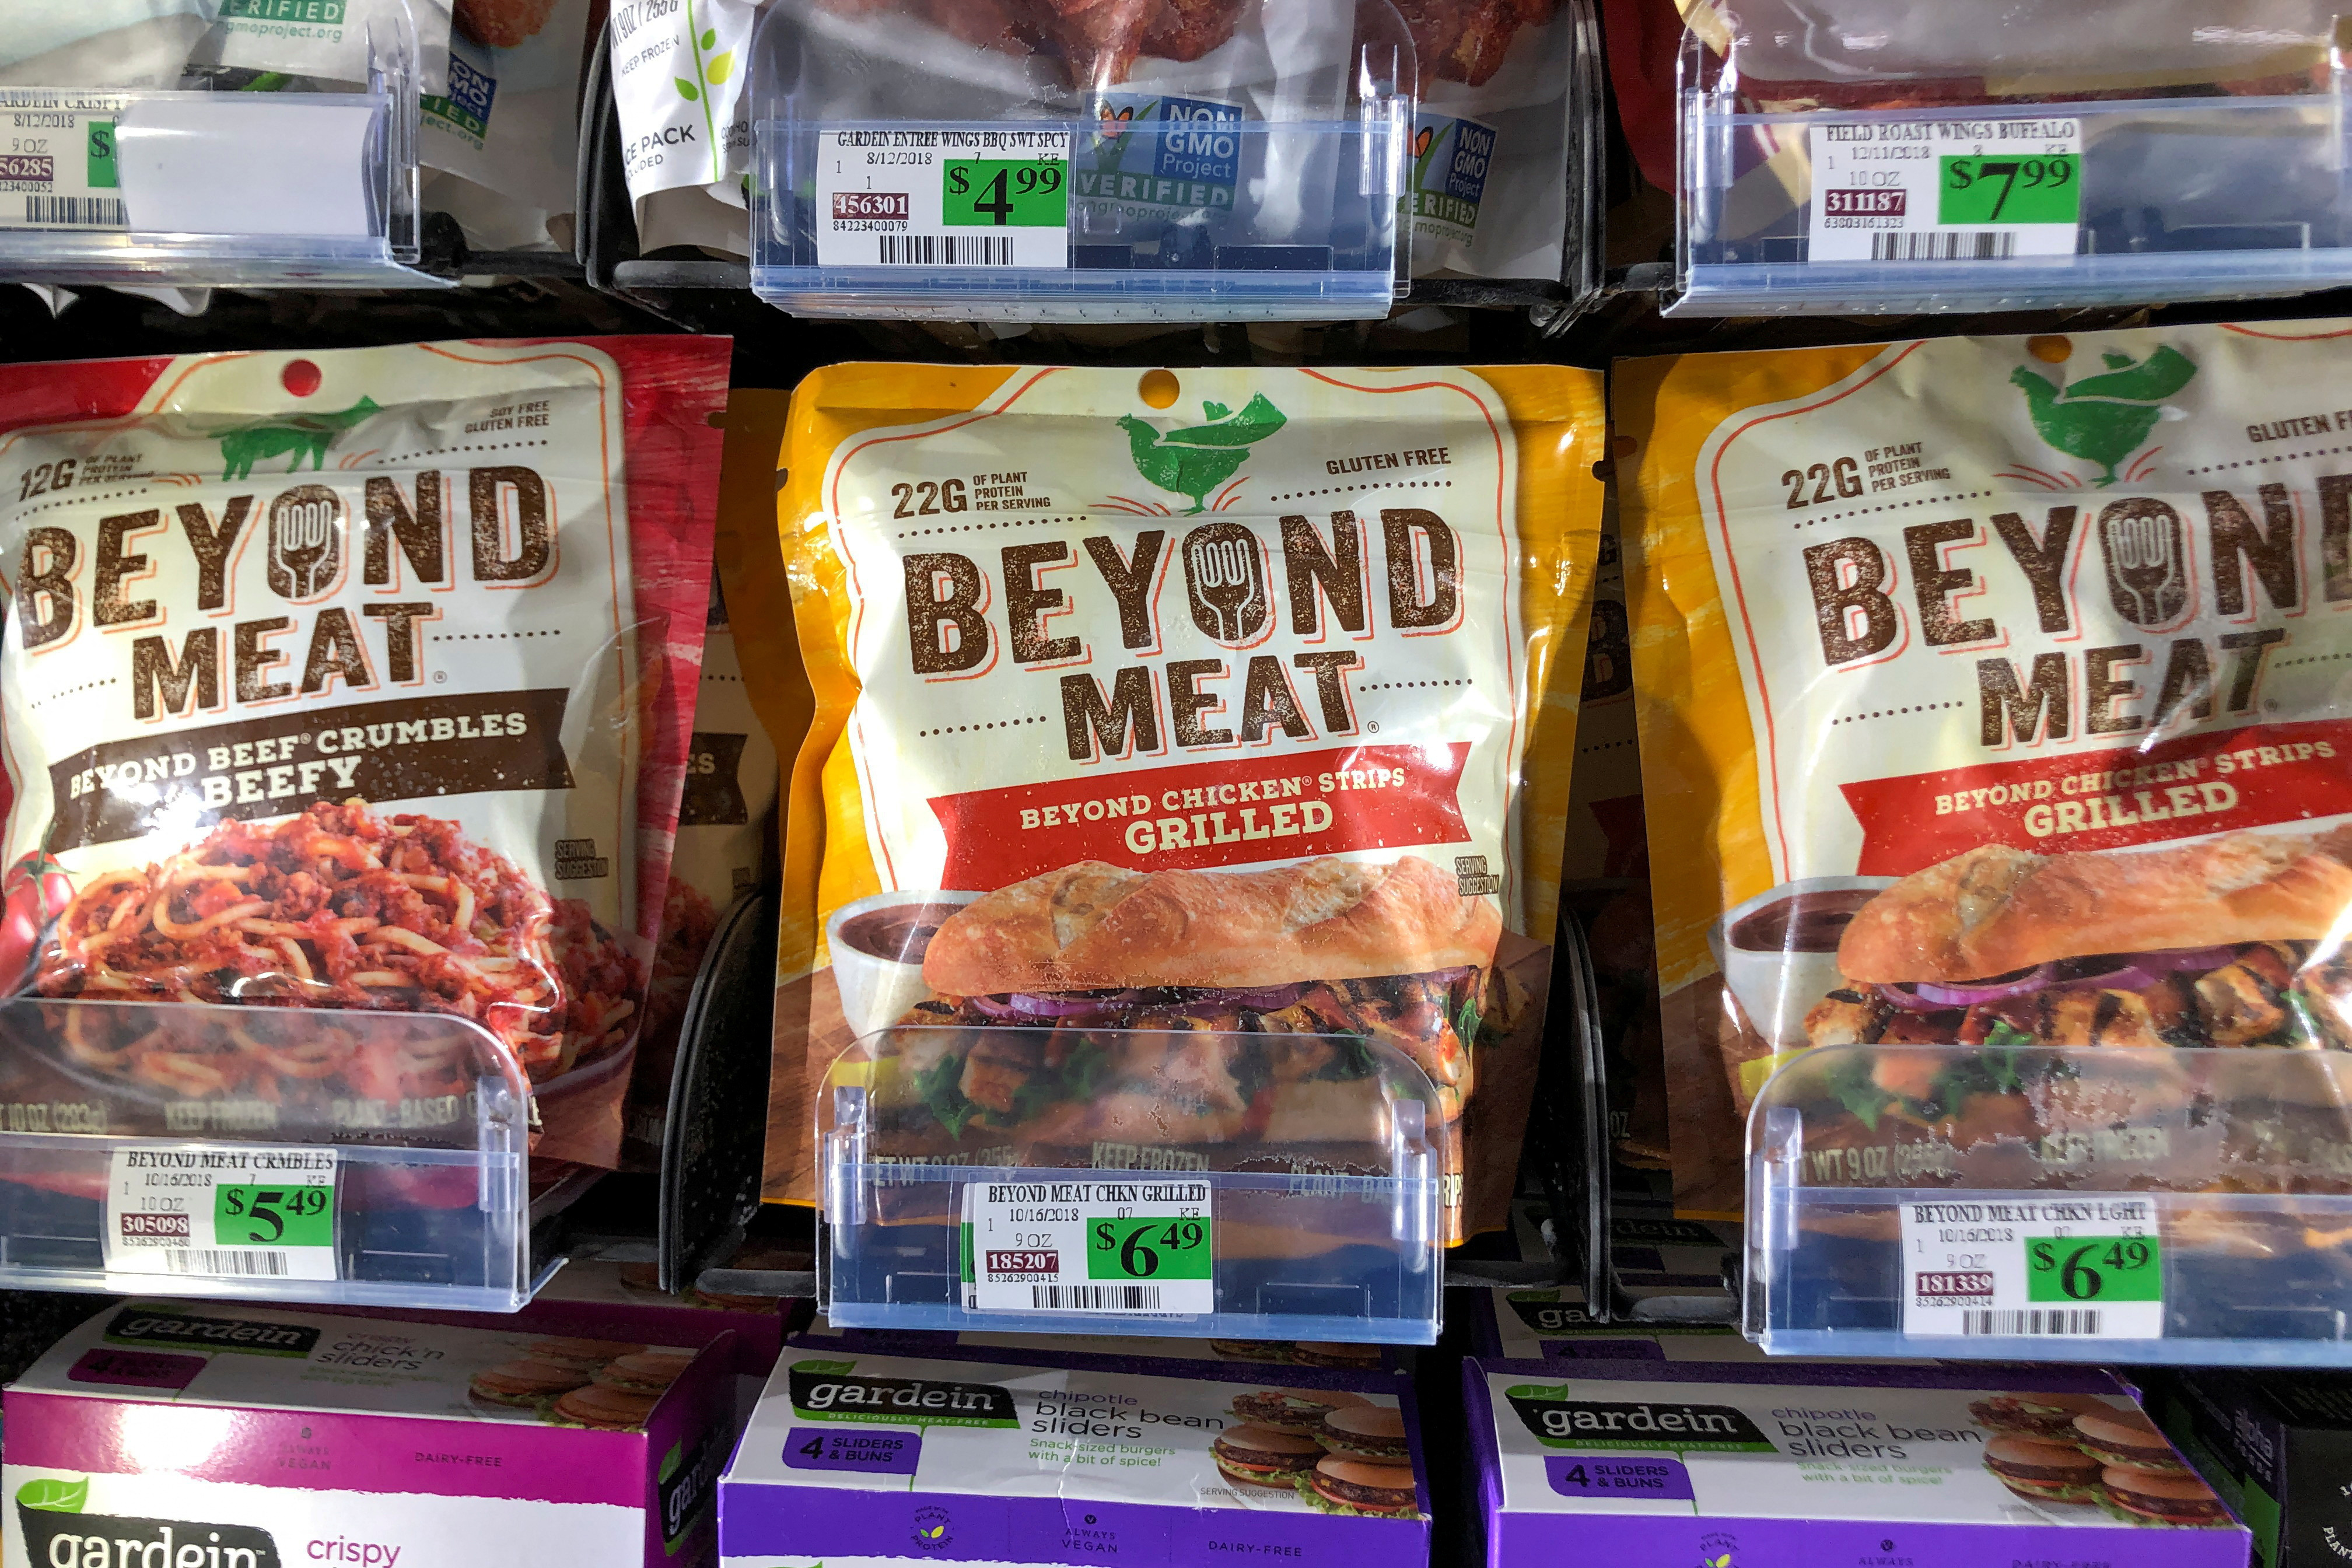 Products from Beyond Meat Inc, the vegan burger maker, are shown for sale at a market in Encinitas, California